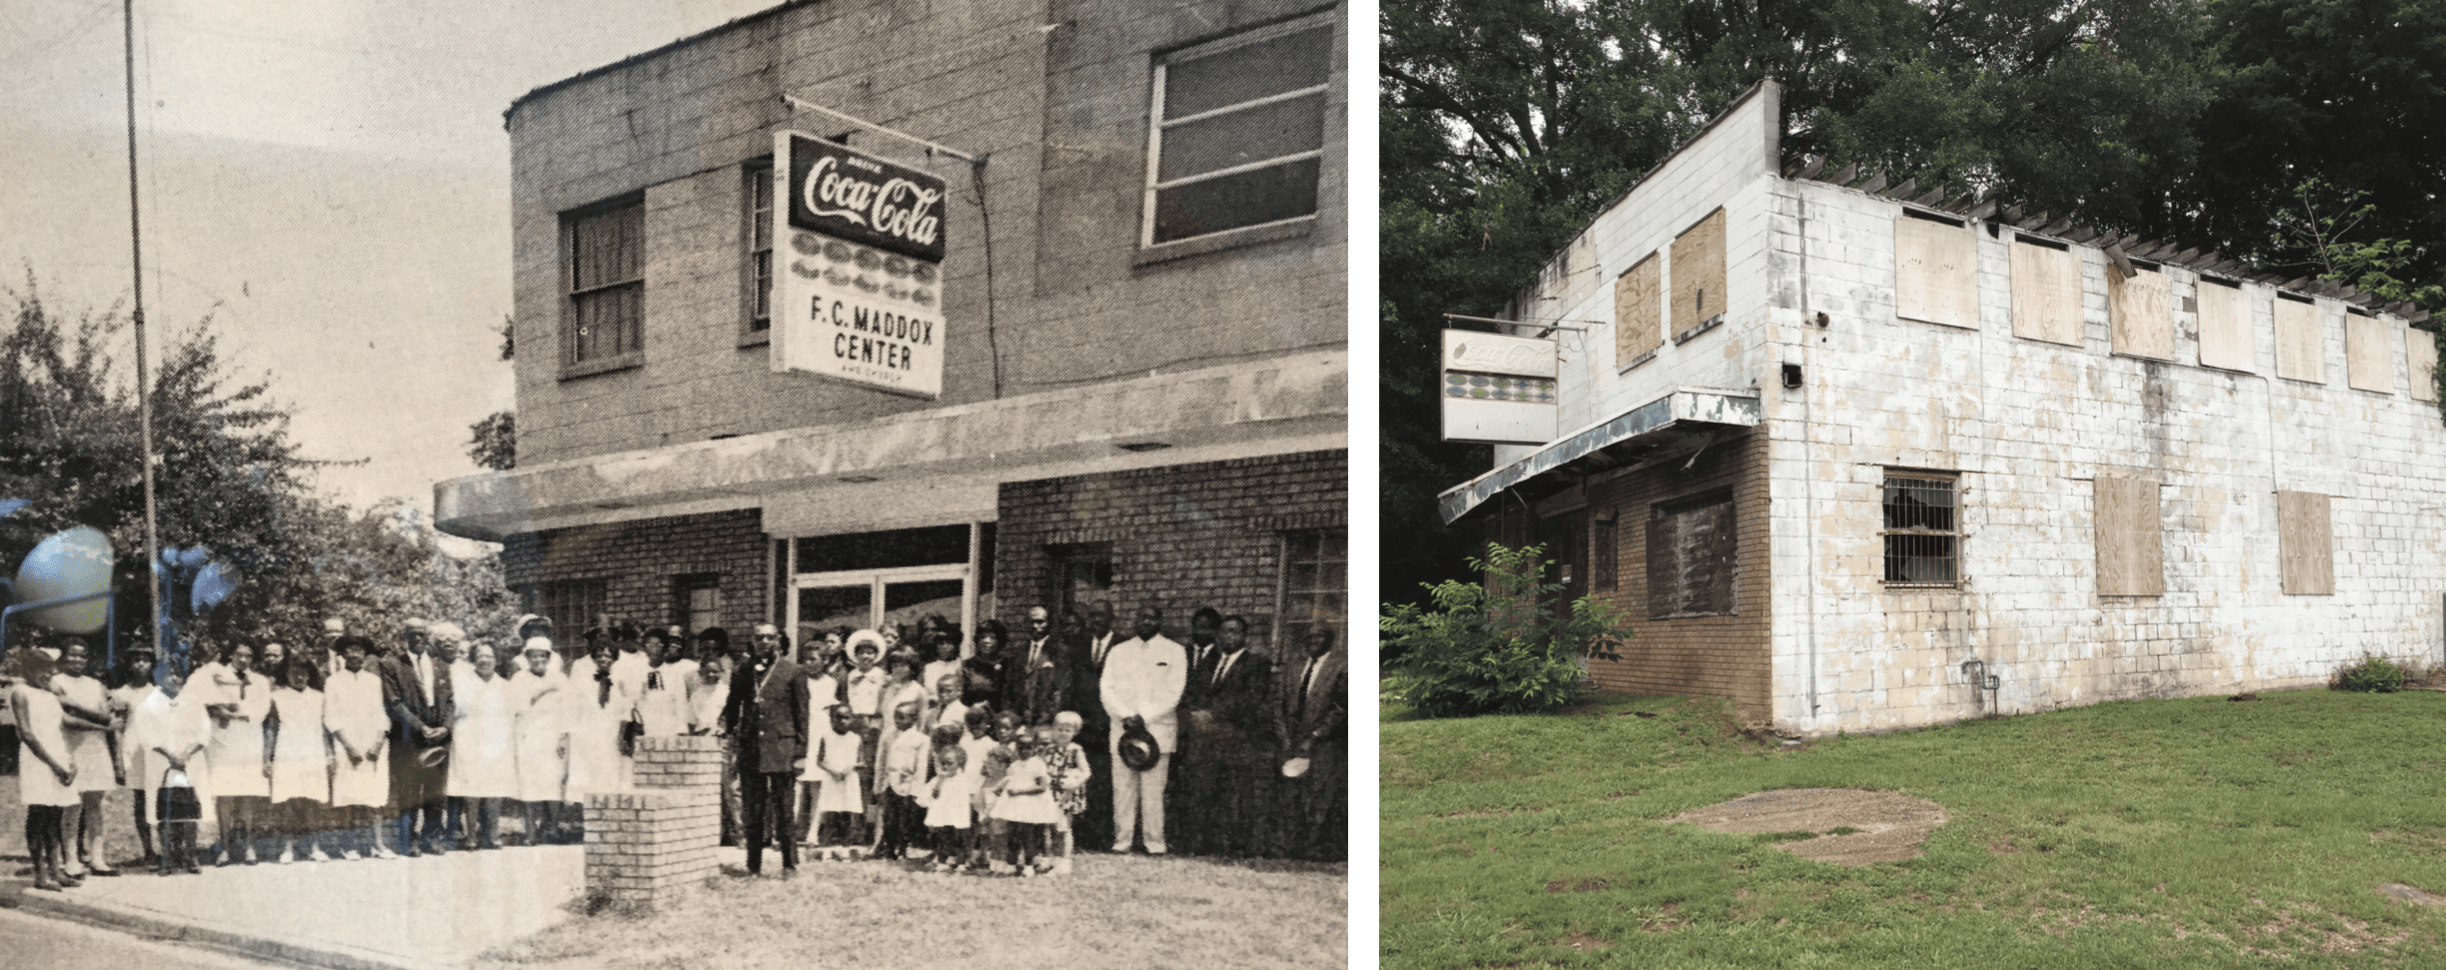 Maddox Center then and now